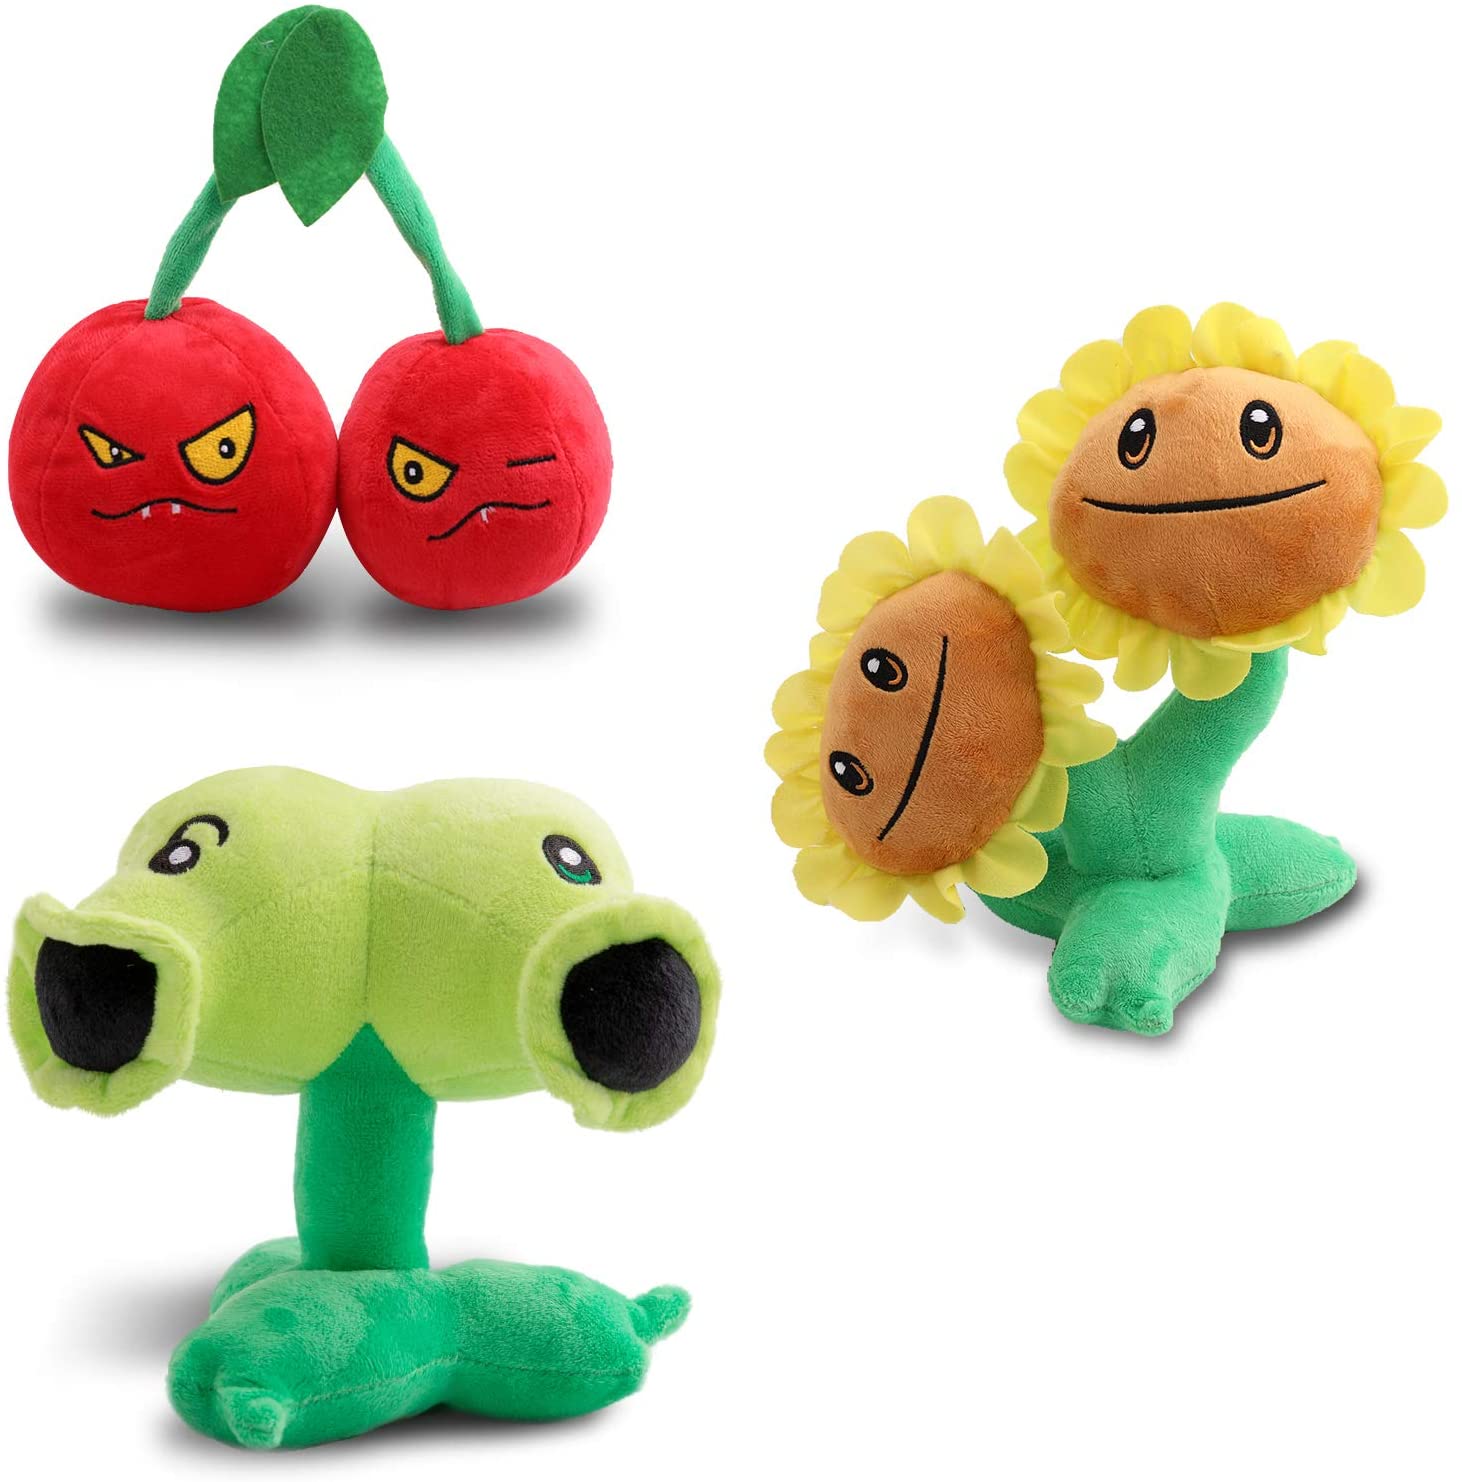 Stuffed Soft Doll Peashooter Plush Toy Hallowen Maikerry 1 PC Plants VS Zombies Plush Toy Great Gifts for Kids and Fans Christmas for Birthday 